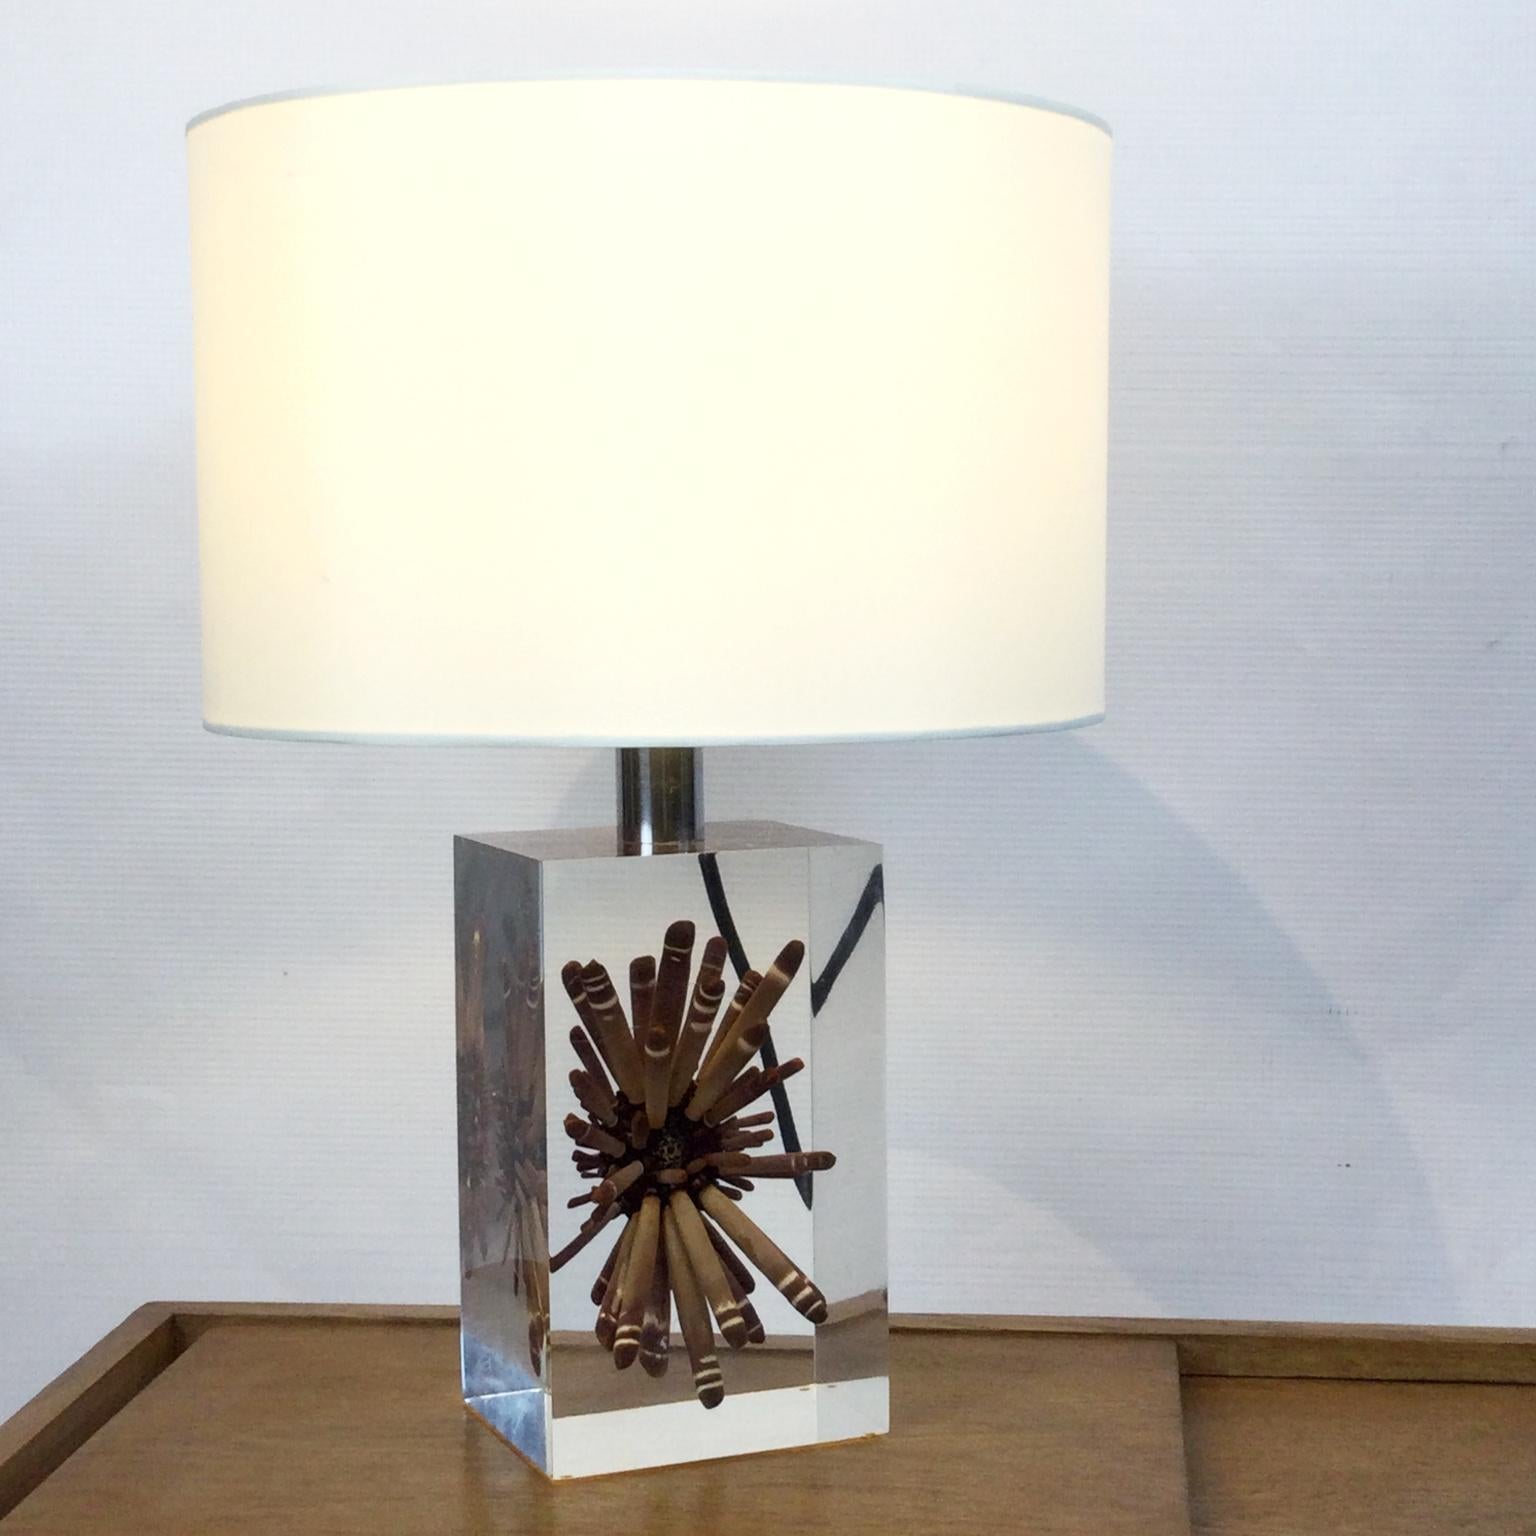 Pierre Giraudon 1970s Large Resin Table Lamp with Tropical Ursin Inclusion For Sale 1